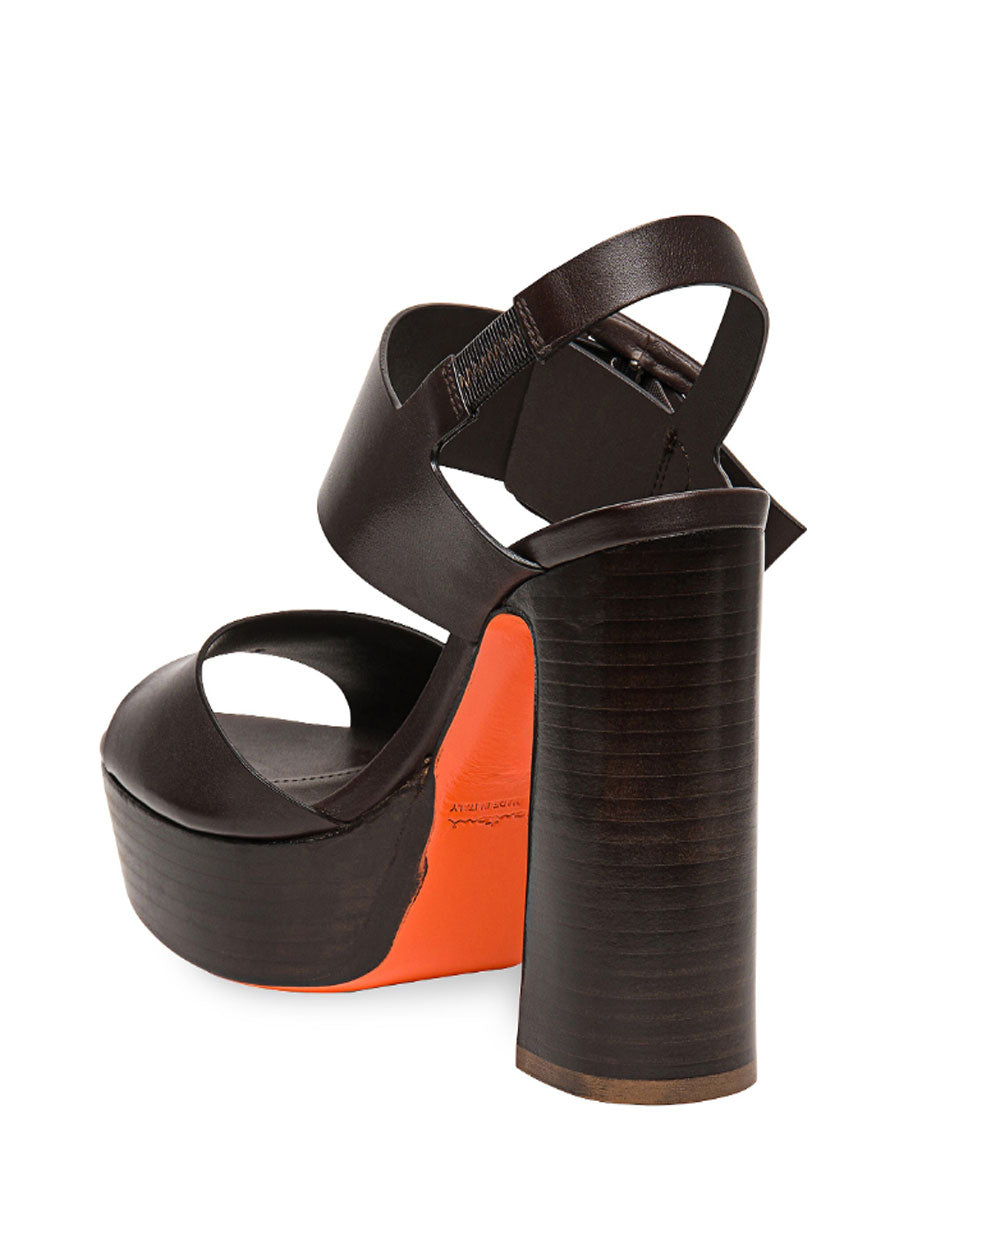 Bruxel 105mm Leather Platform Sandal in Chocolate Brown